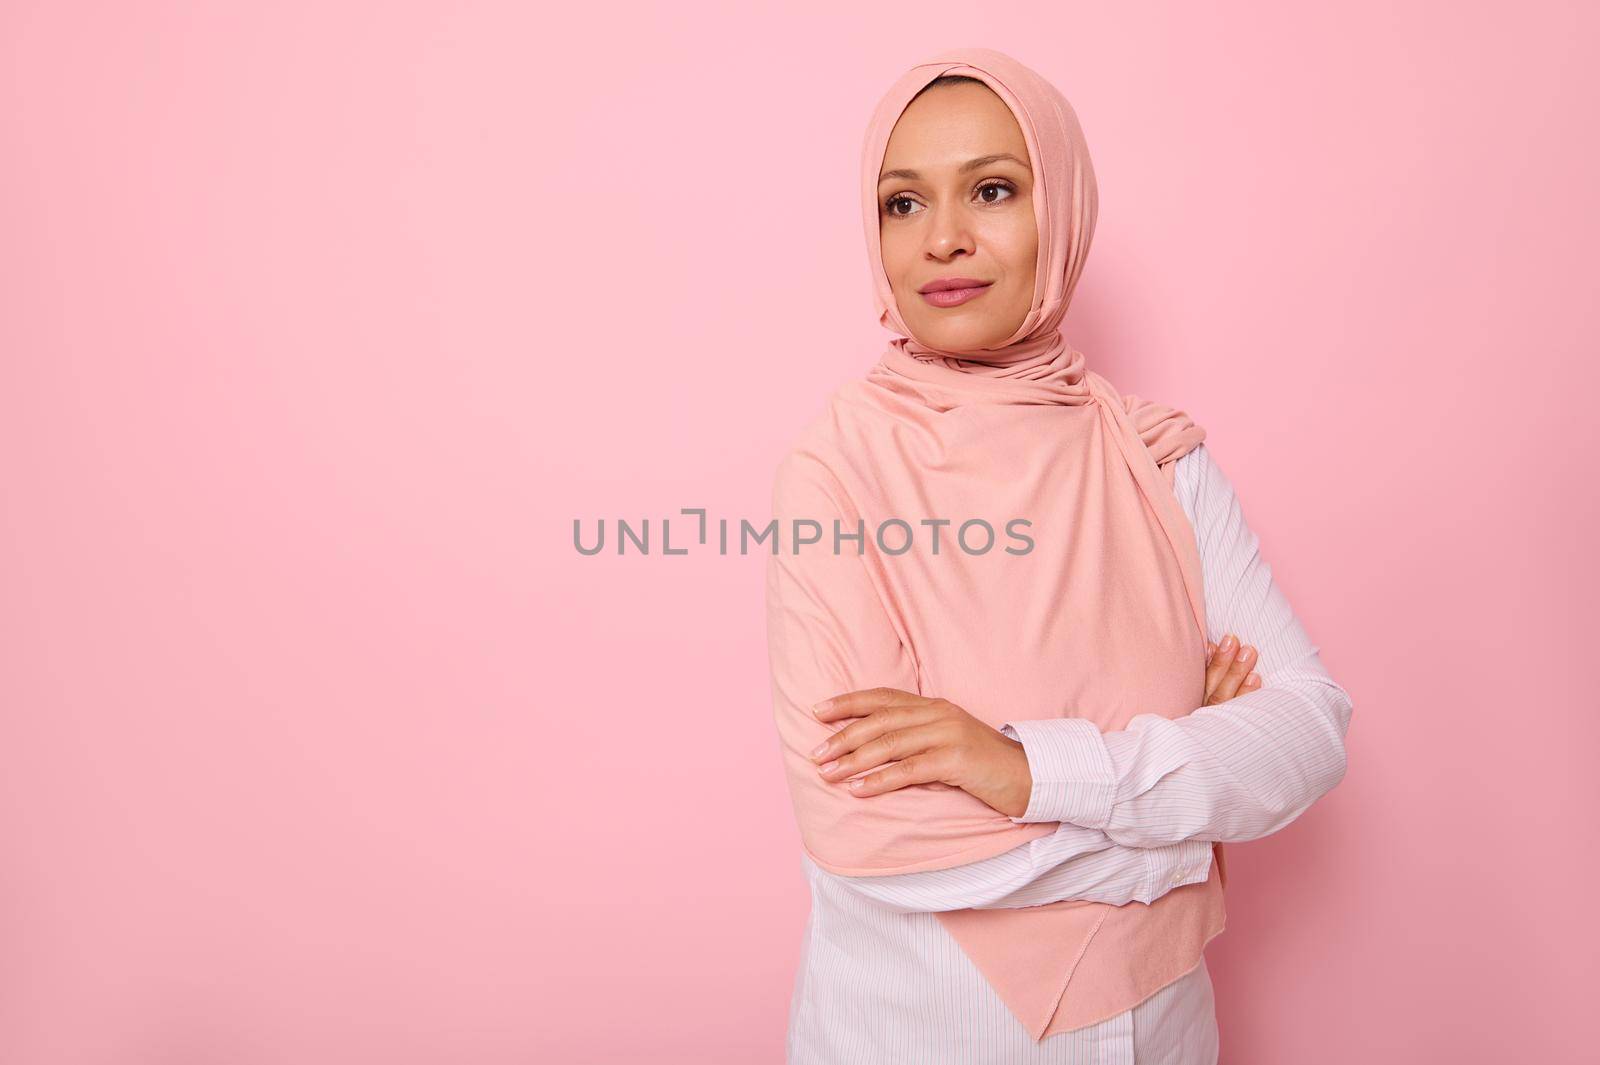 Confident portrait of Arabic Muslim beautiful woman with attractive gaze and look, wearing pink hijab and standing three quarters to colored background with copy space